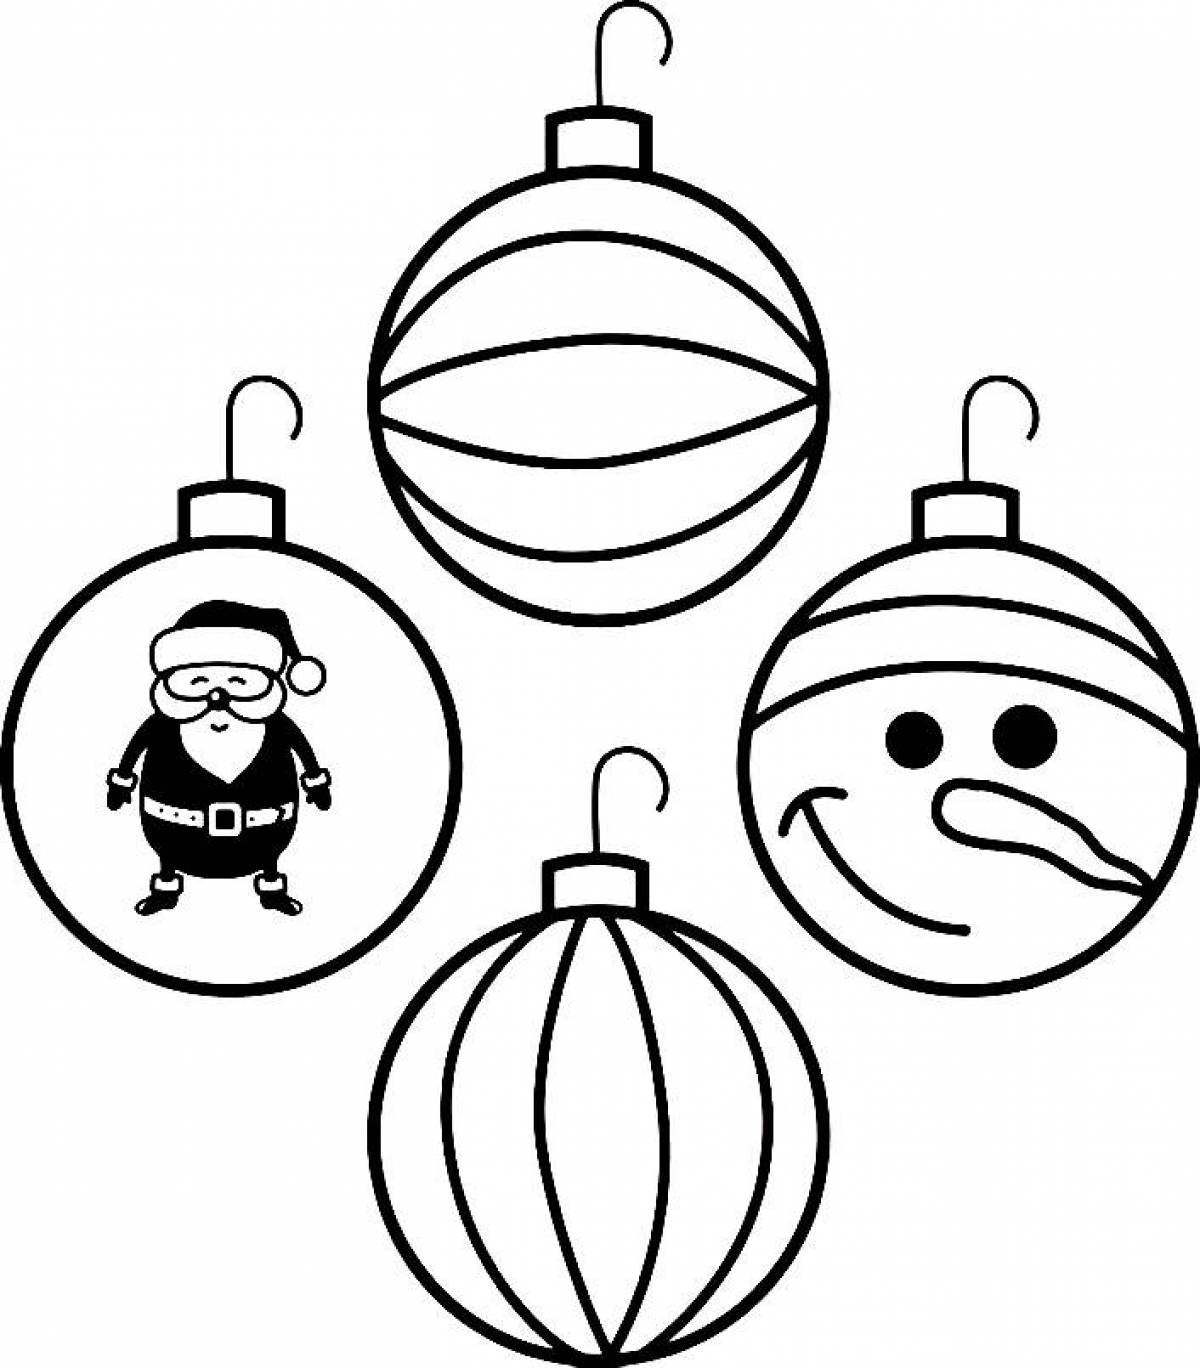 Blessed Christmas tree coloring page